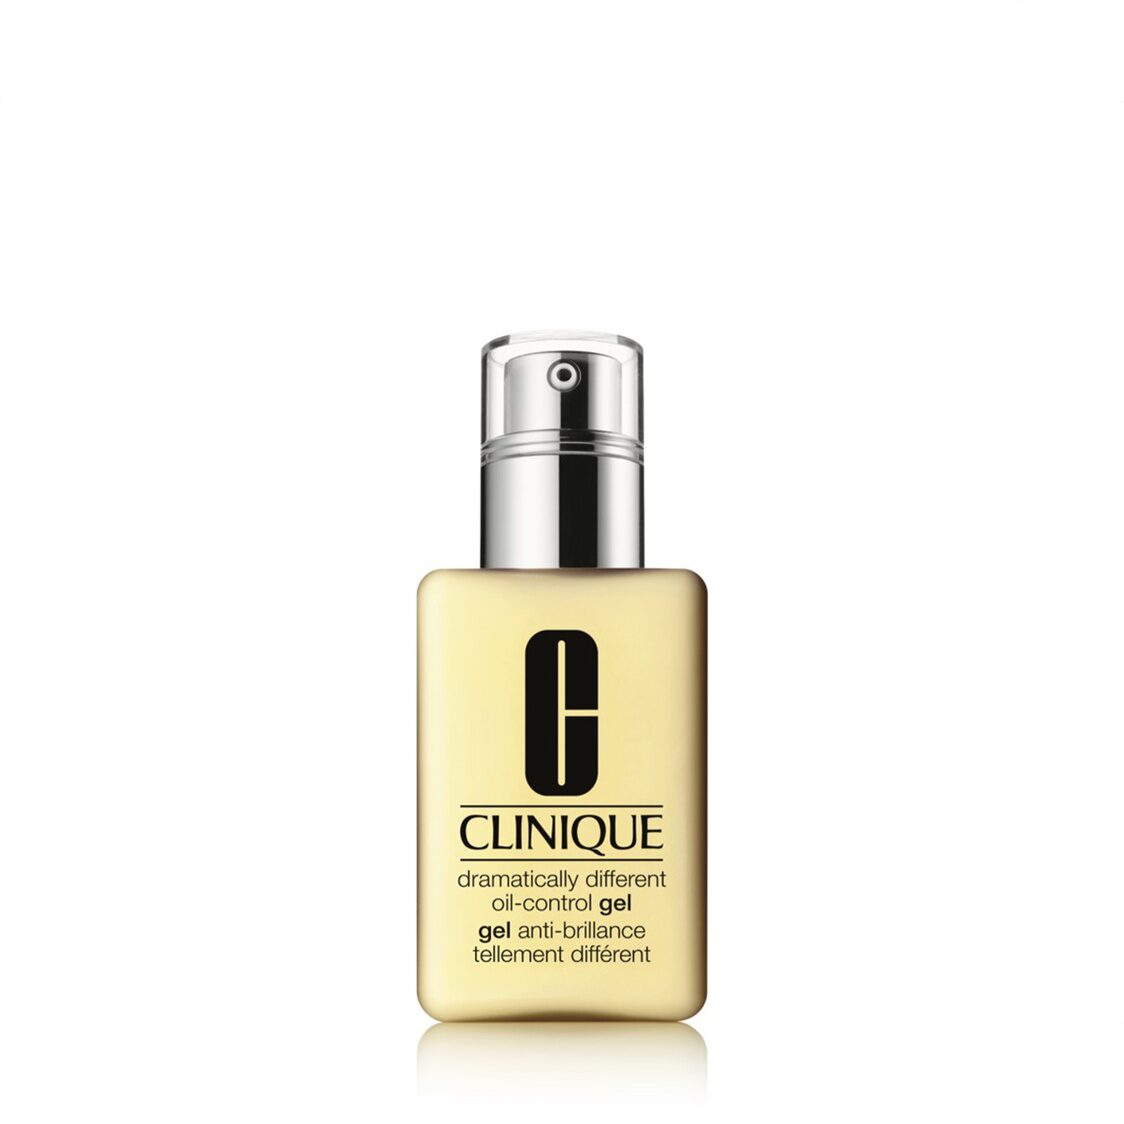 Clinique Dramatically Different Oil-Control Gel 125ml